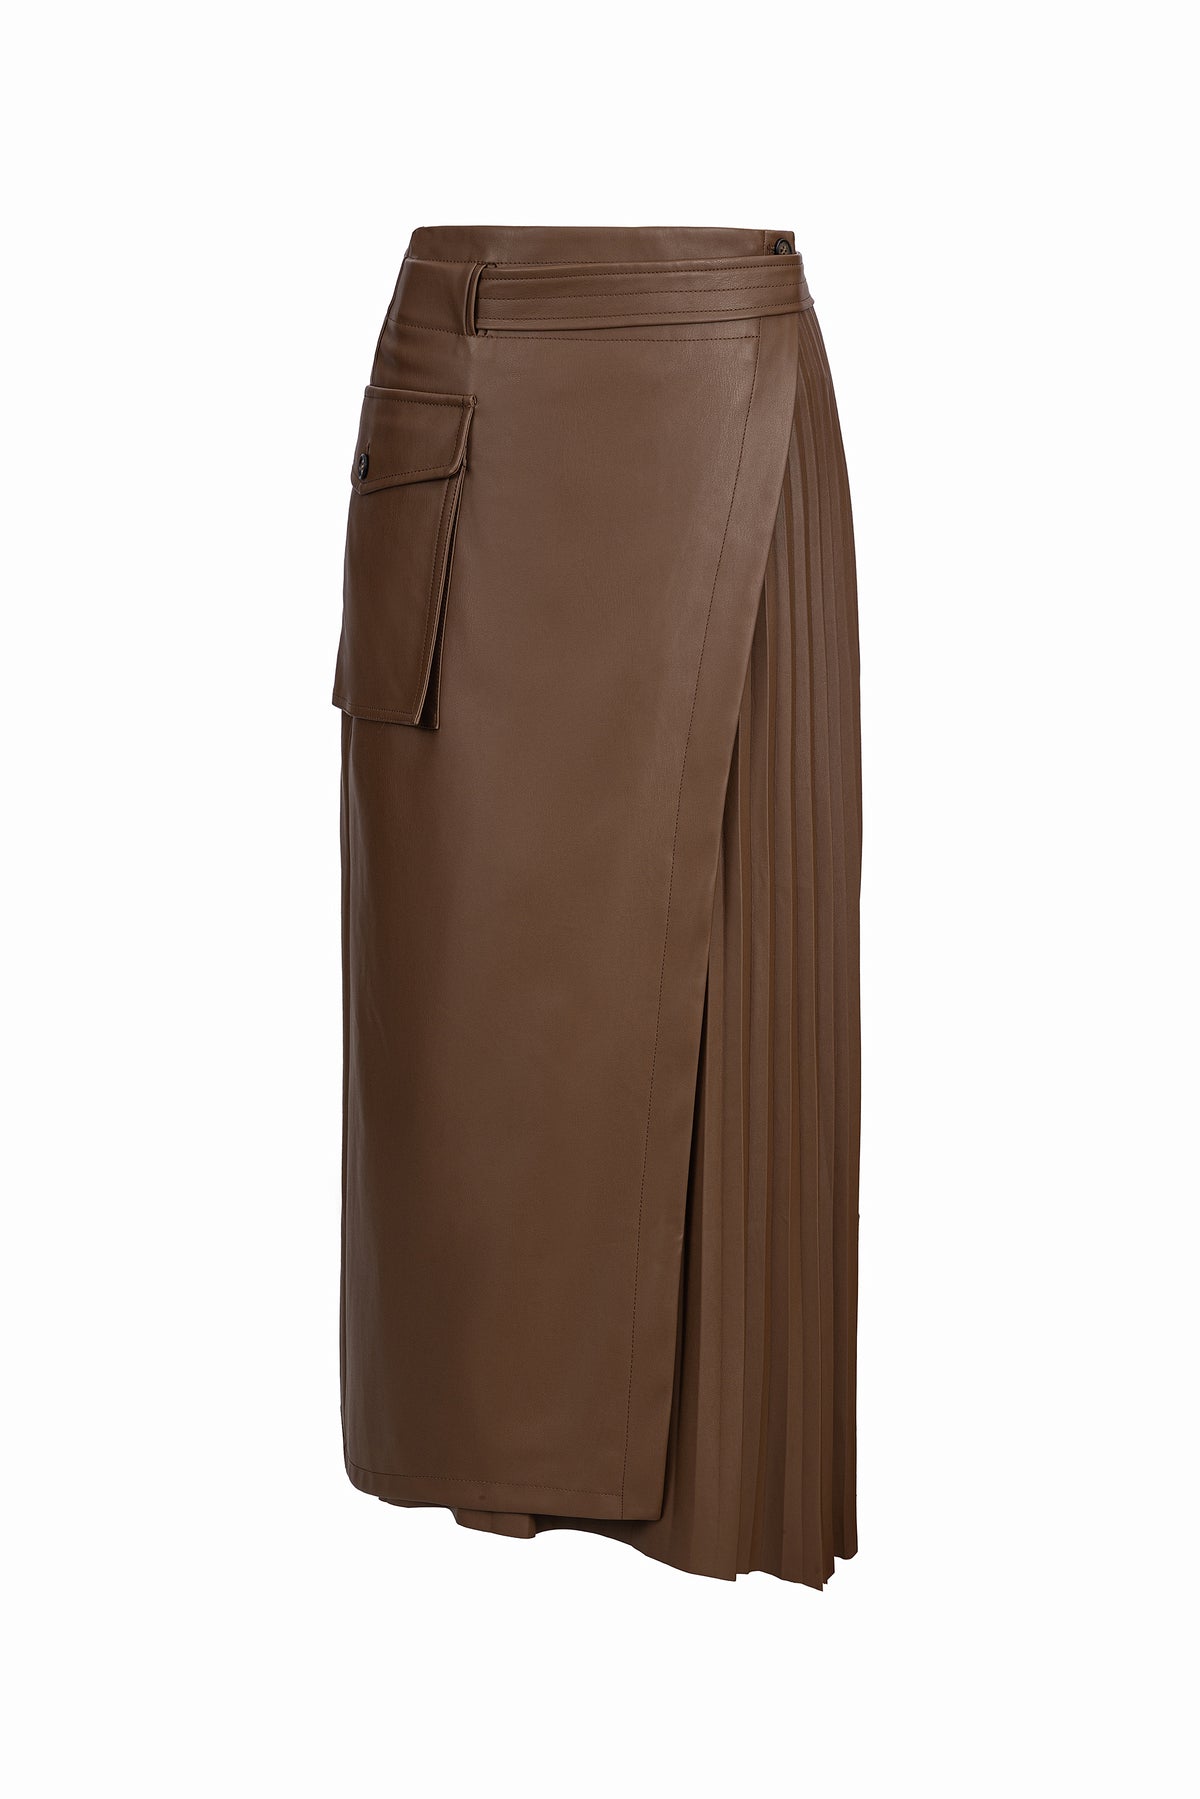 Faux Leather Skirt in Nut